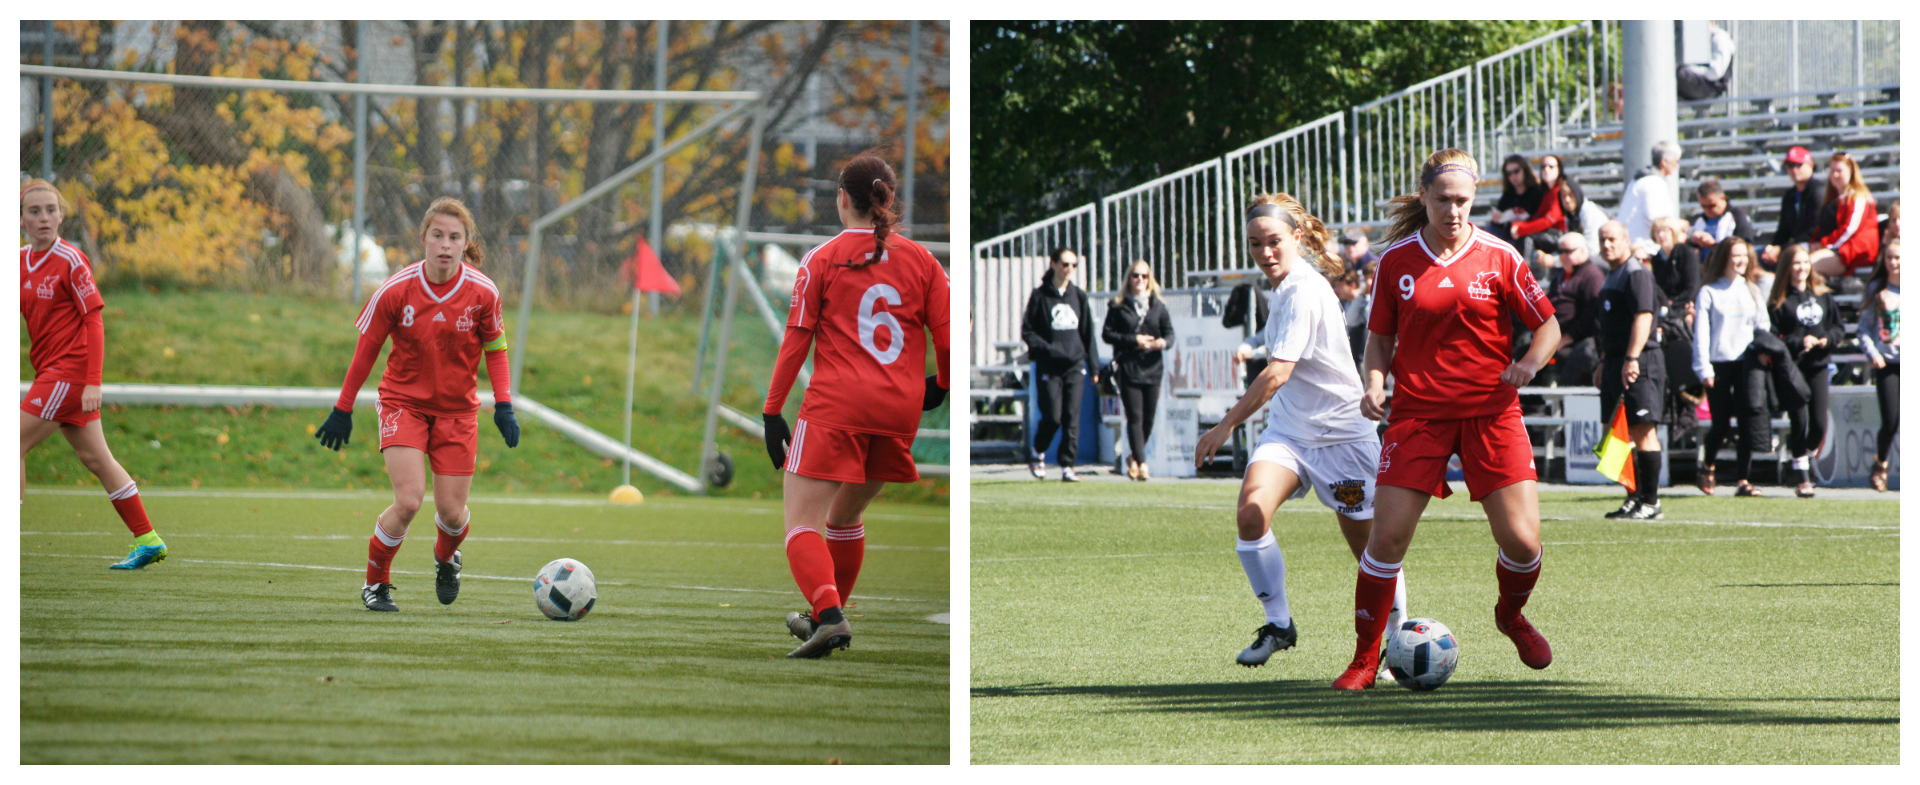 Rivkin & Noseworthy named 1st Team All-Canadians